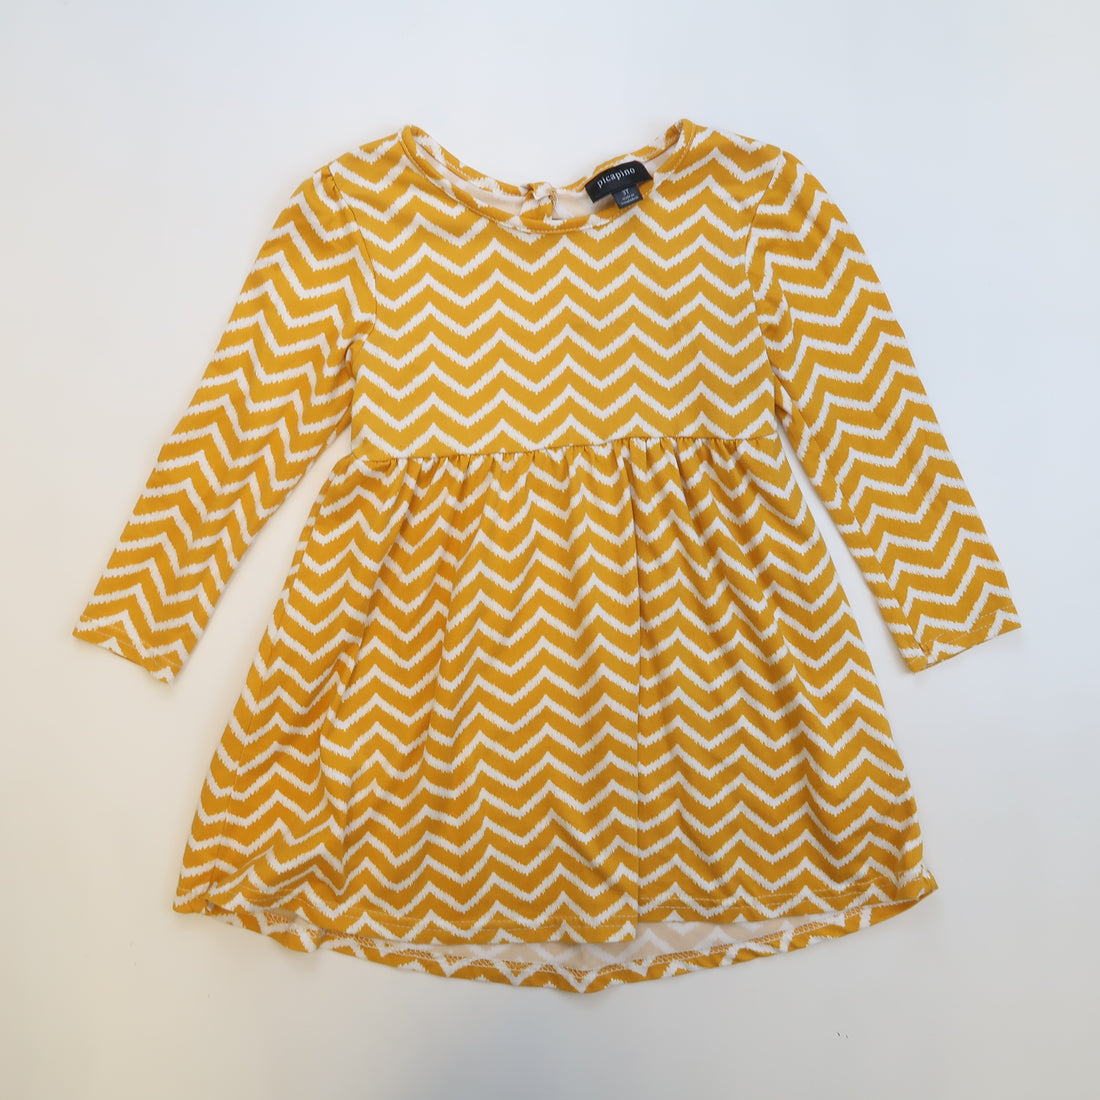 Picapino - Dress (3T)